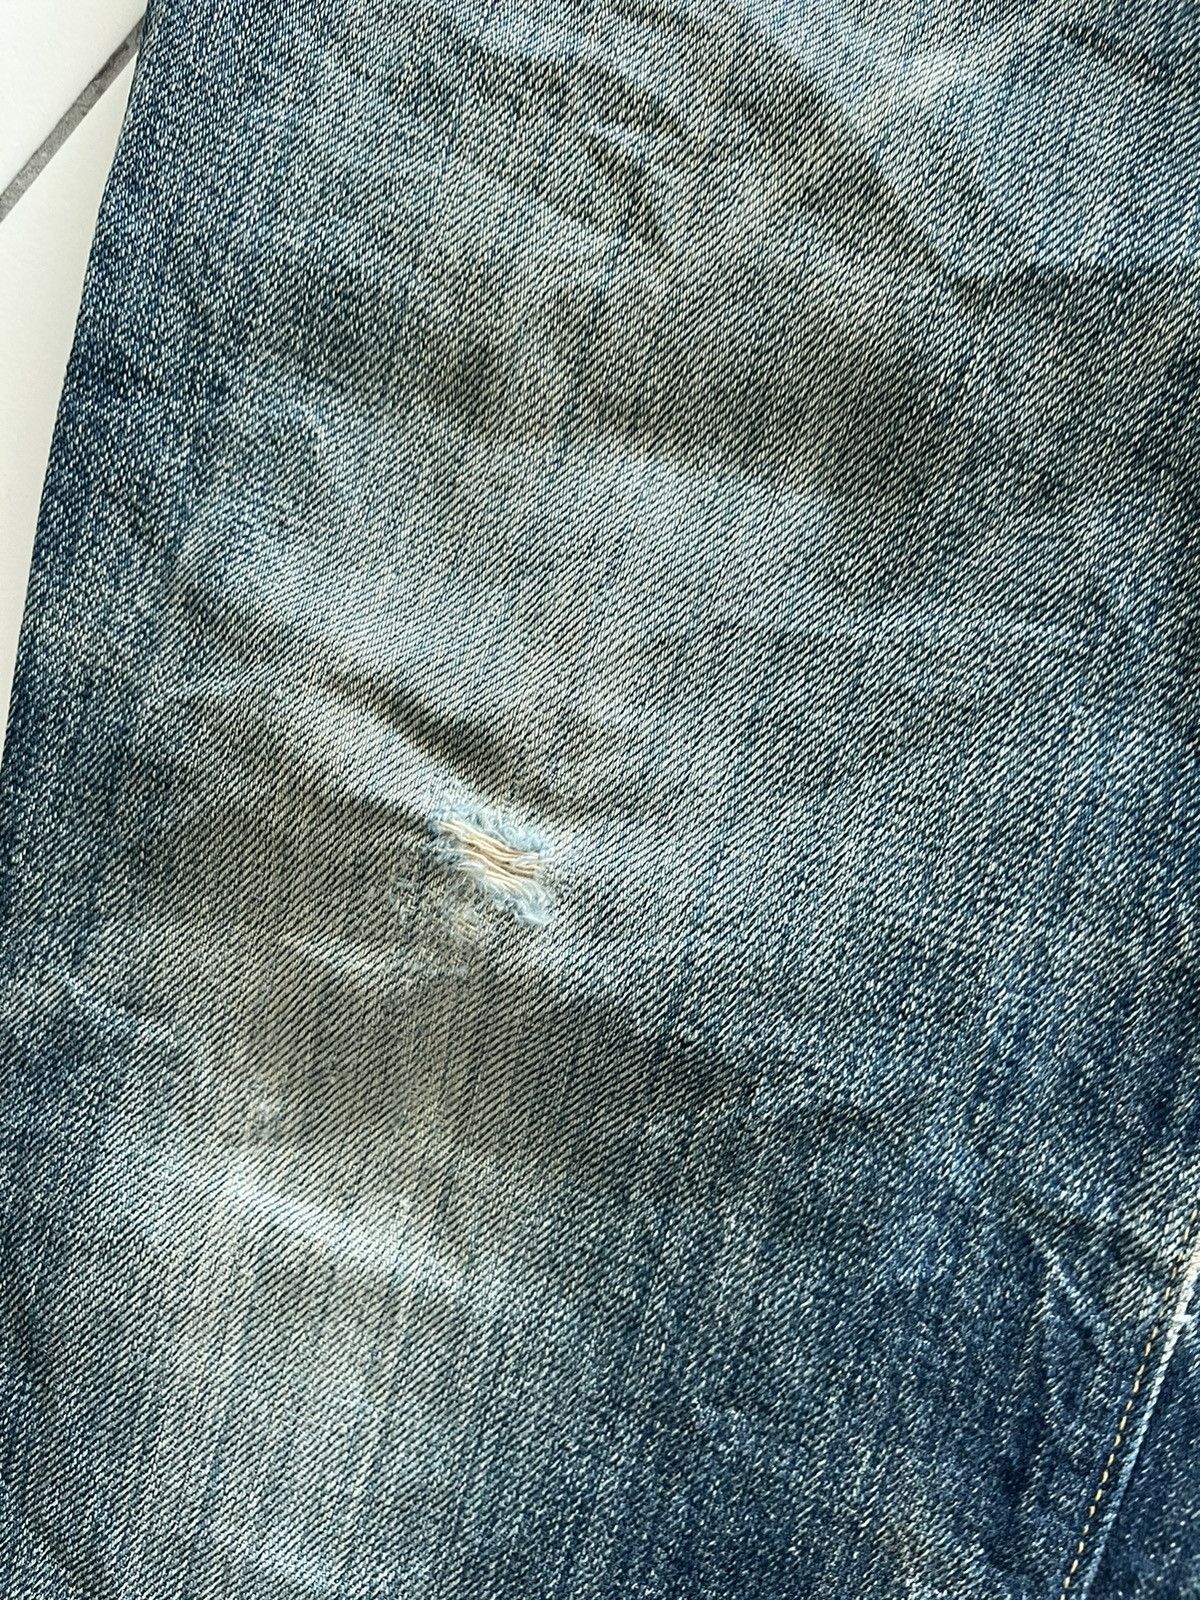 Japanese Brand - JAPANESE REPRO DENIM JEANS, BARNS OUTFITTERS & CO BRAND - 9